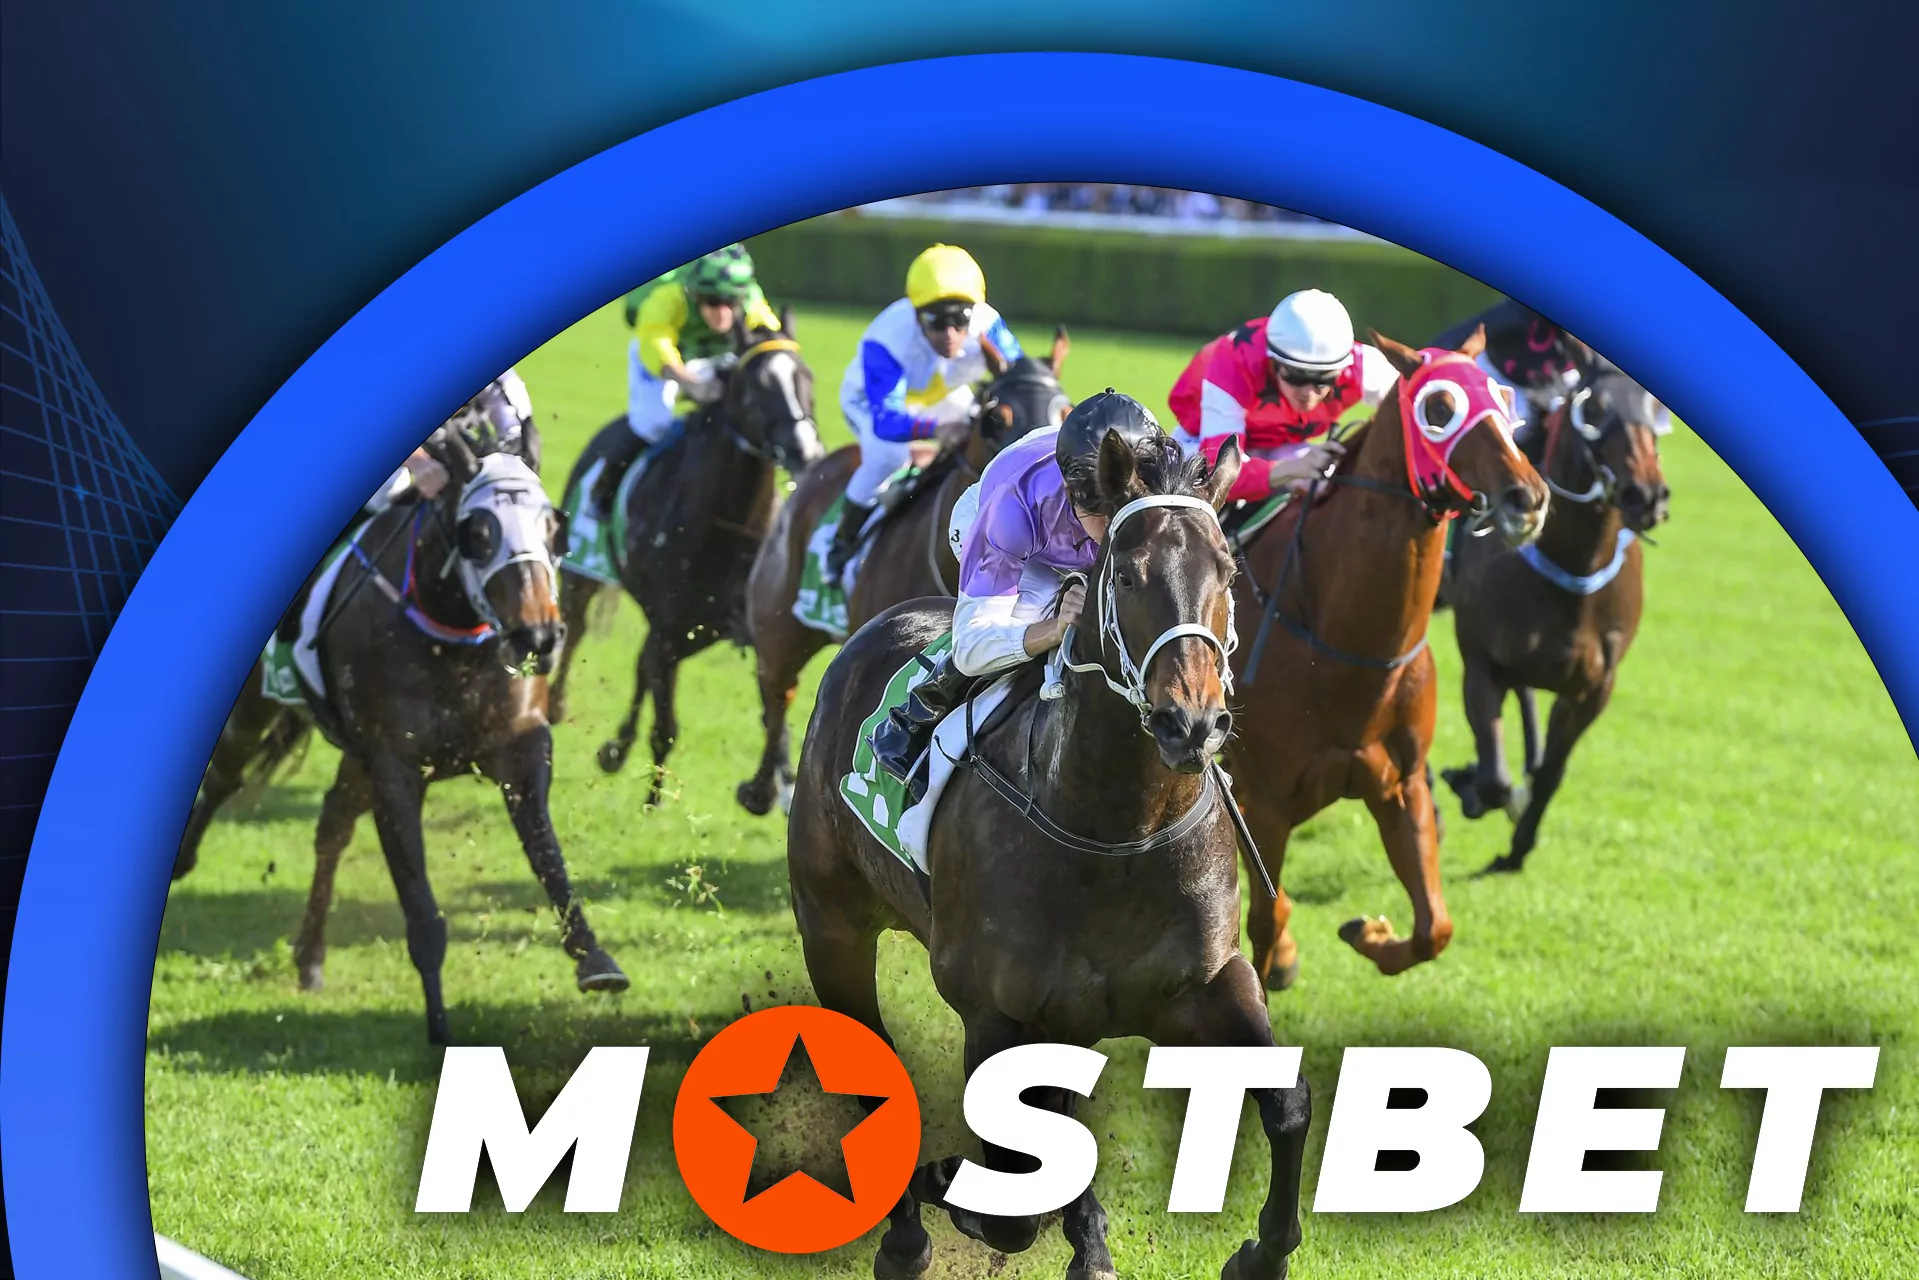 Betting on horse racing is also available at Mostbet.